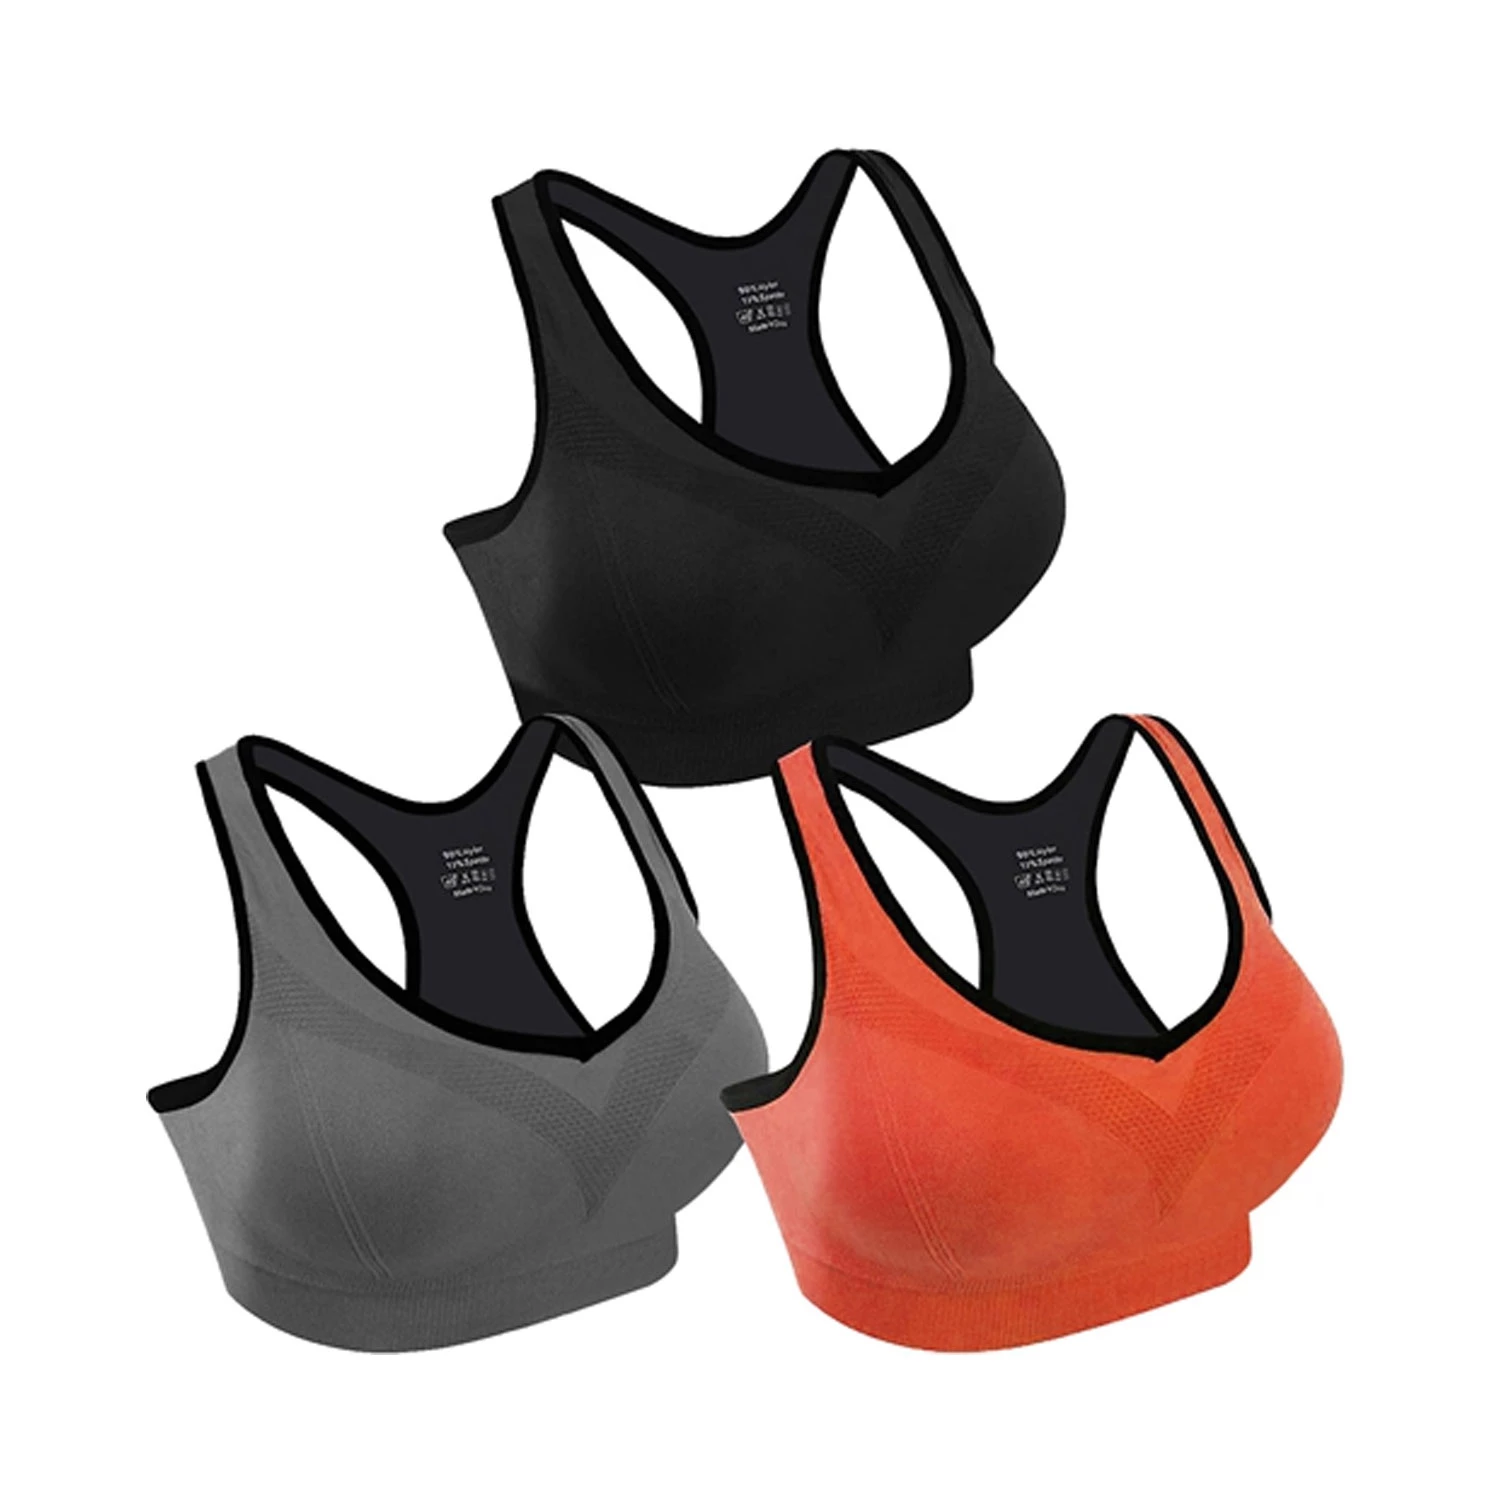 3 Packs Women Padded Sports Bras Yoga Fitness Push up Bra Female Top for Gym Running Workout